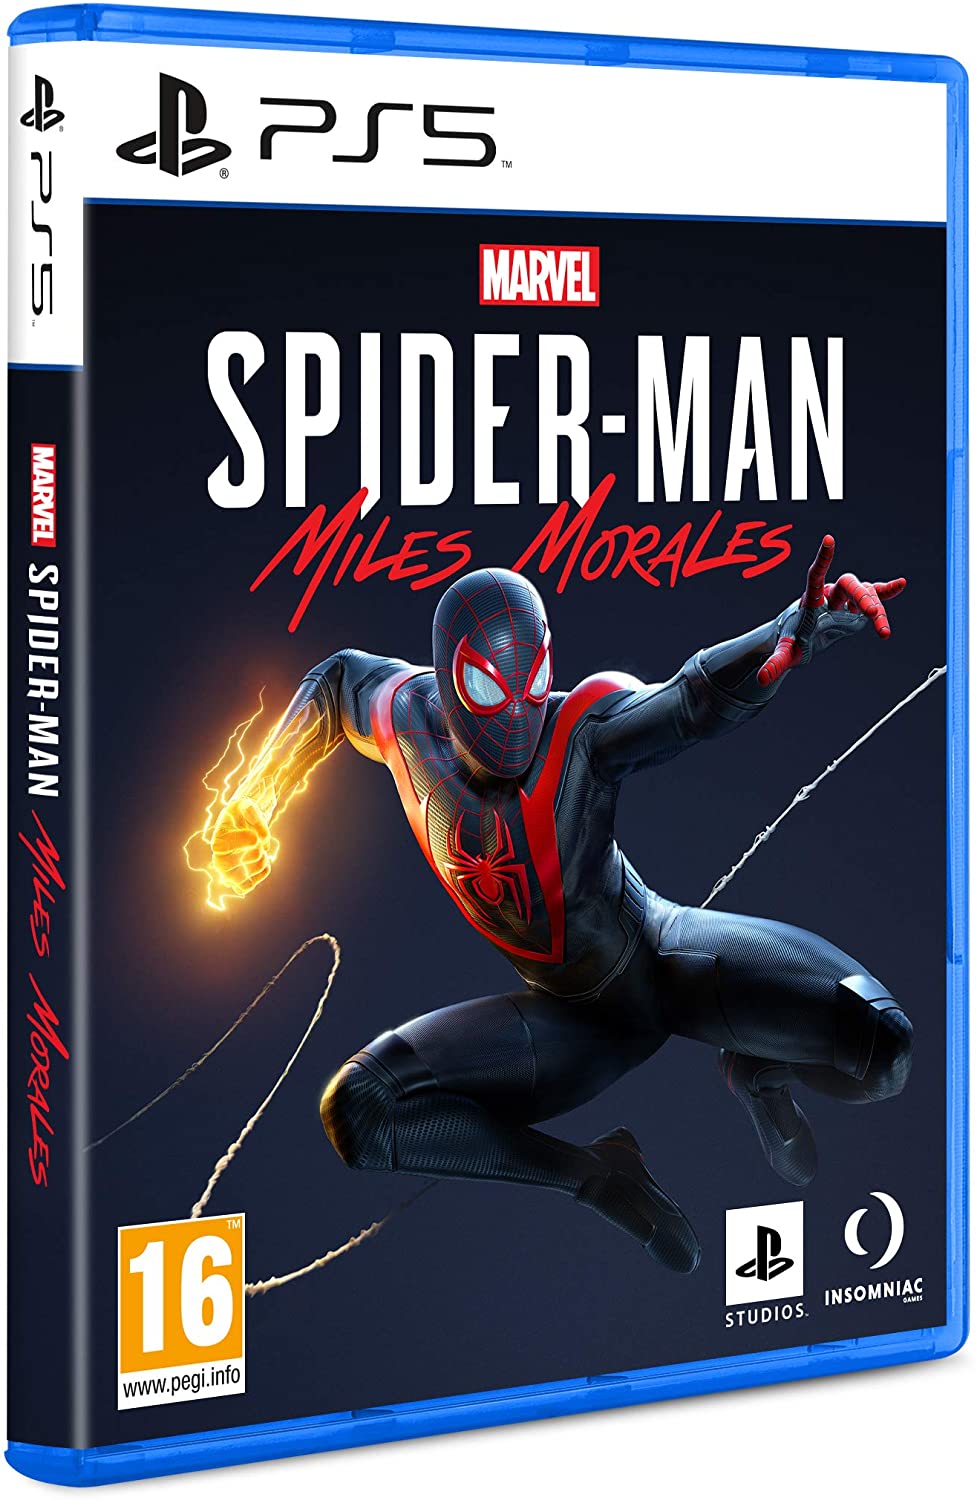 MARVEL SPIDER-MAN ULTIMATE EDITION PS5 GAME BRAND NEW WITH SEALED PACK - saynama